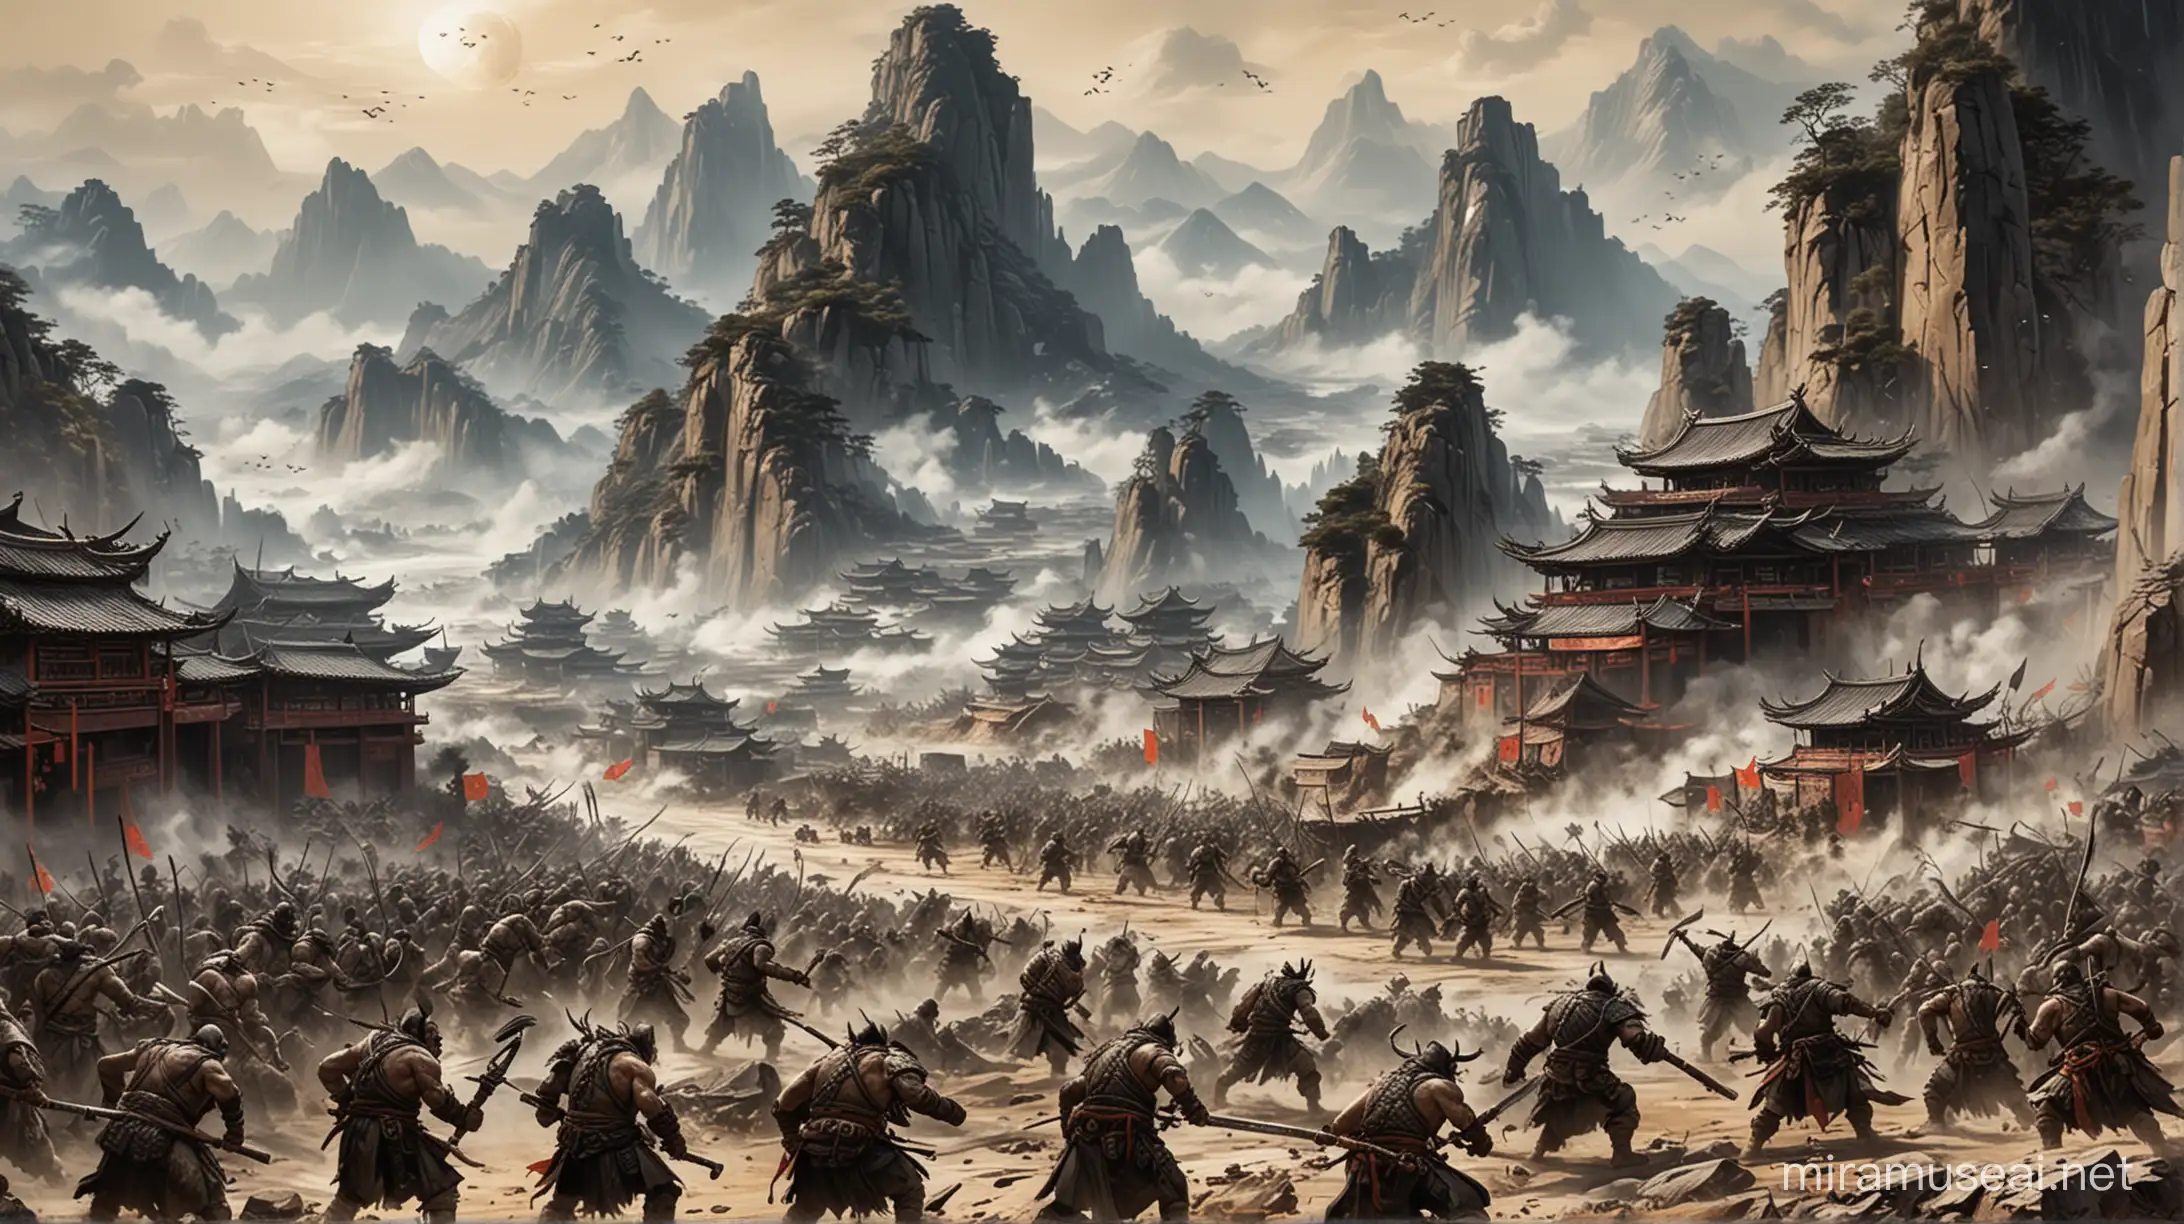 tribal orc army laying waste to a chinese city, various fight scenes
mountains in ink painting in the background